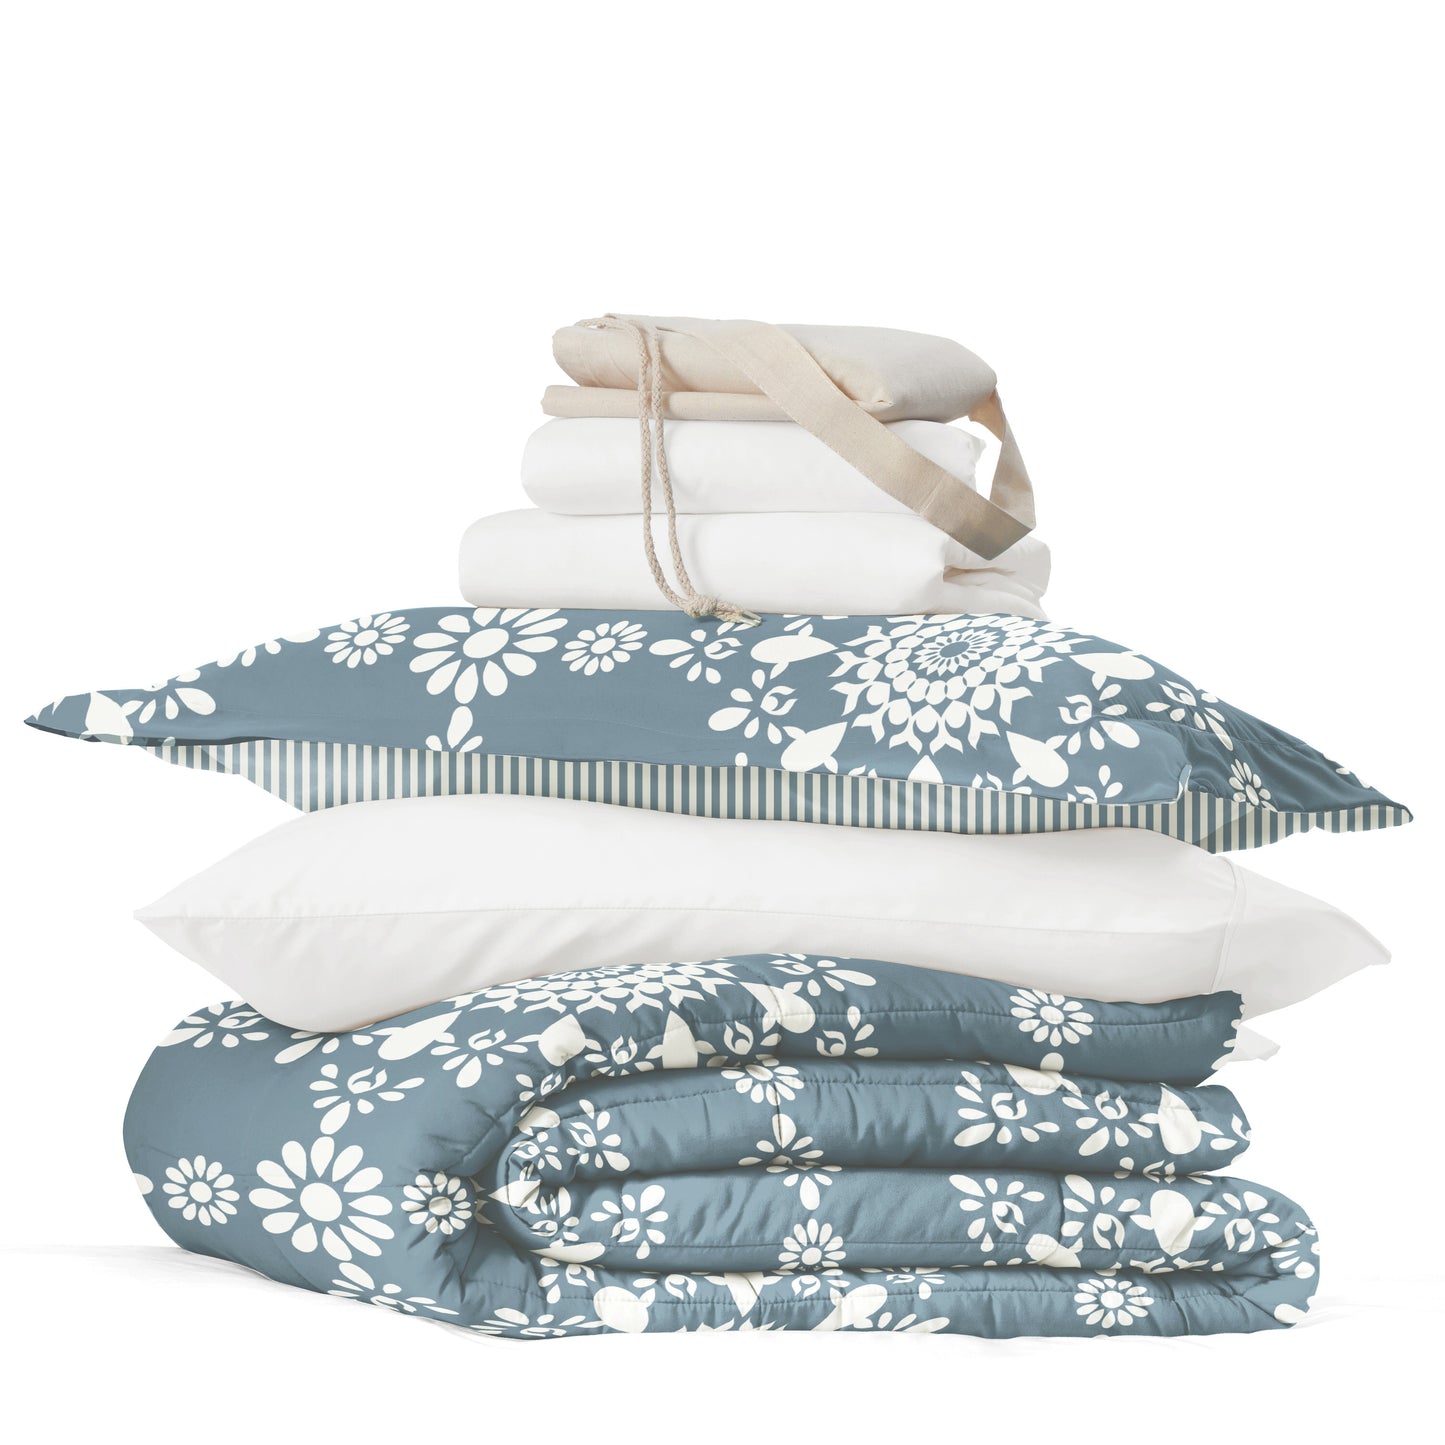 Campus Ready Dorm Twin XL Bedding Bundle: Patterned Comforter Set, Solid Sheet Set, Pillows and Laundry Bag